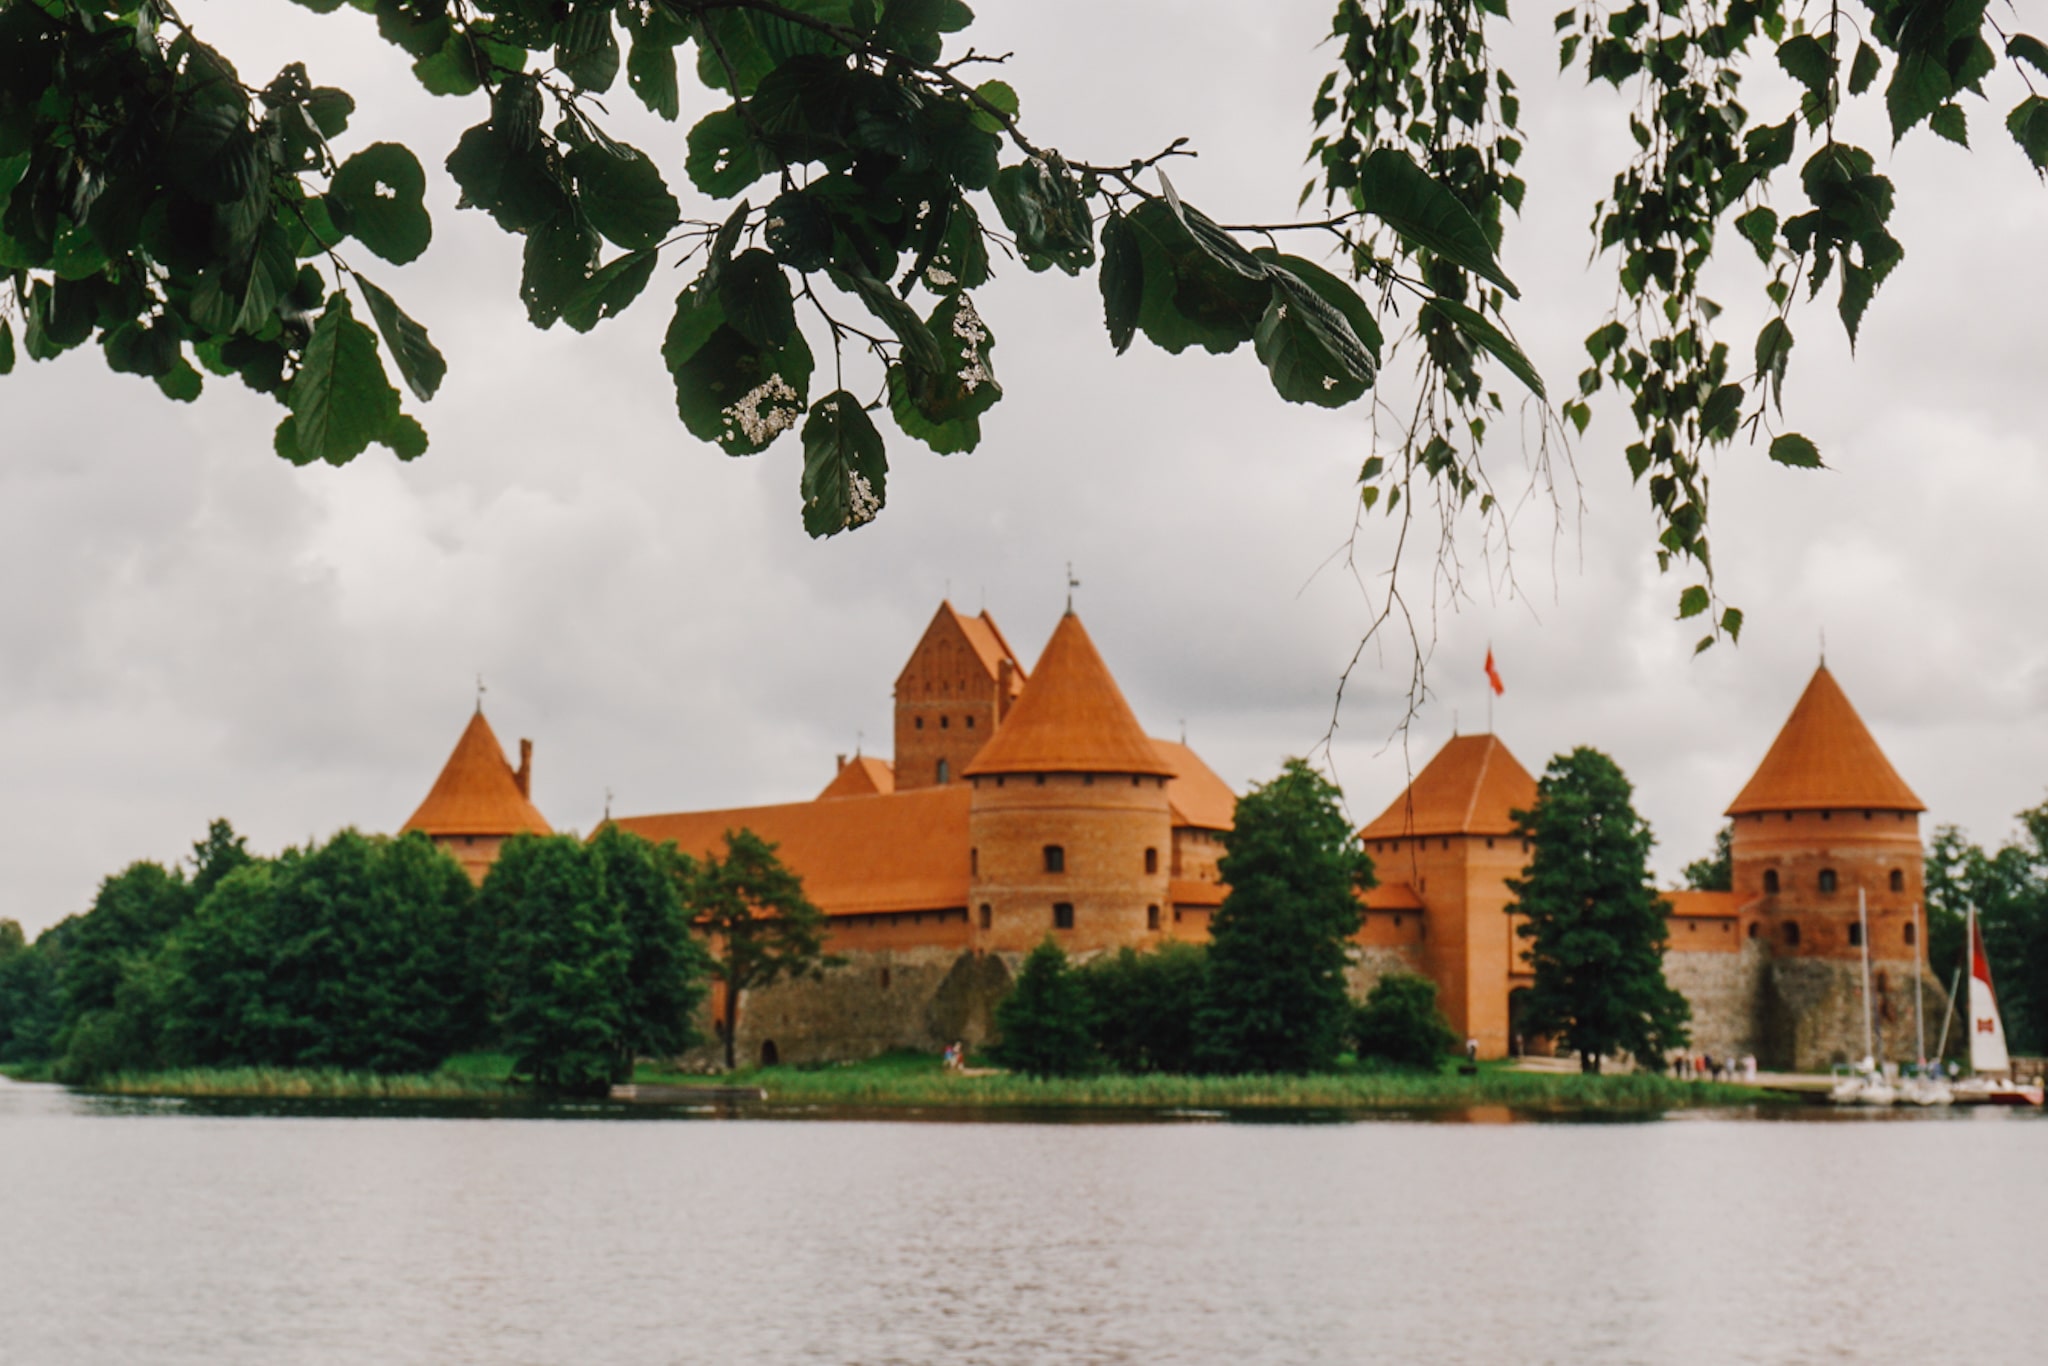 You are currently viewing Trakai